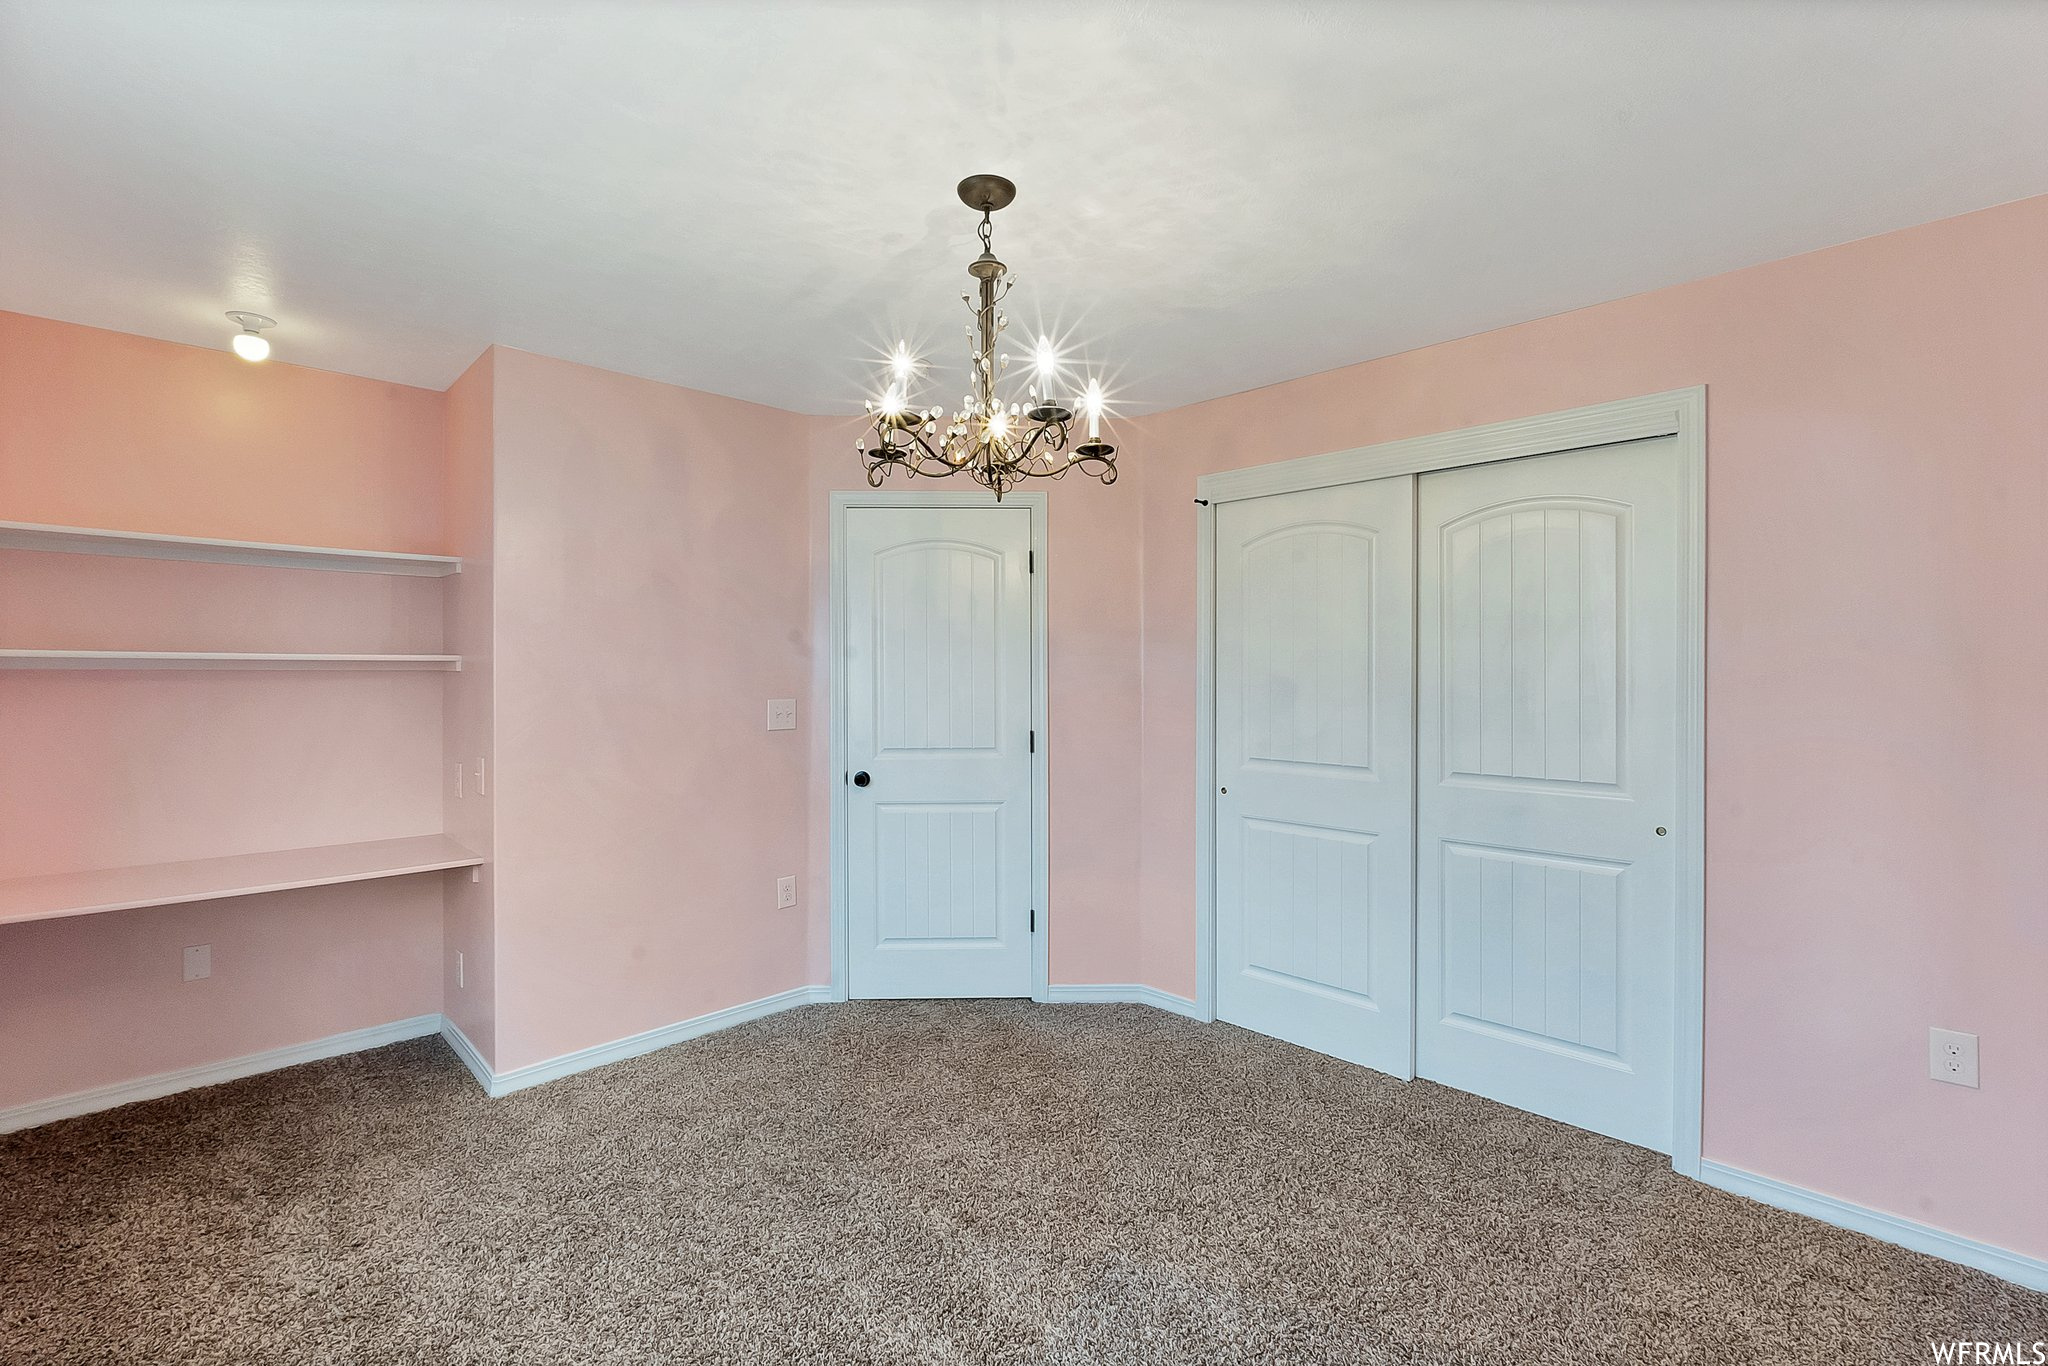 Bedroom with large closet and built in desk.